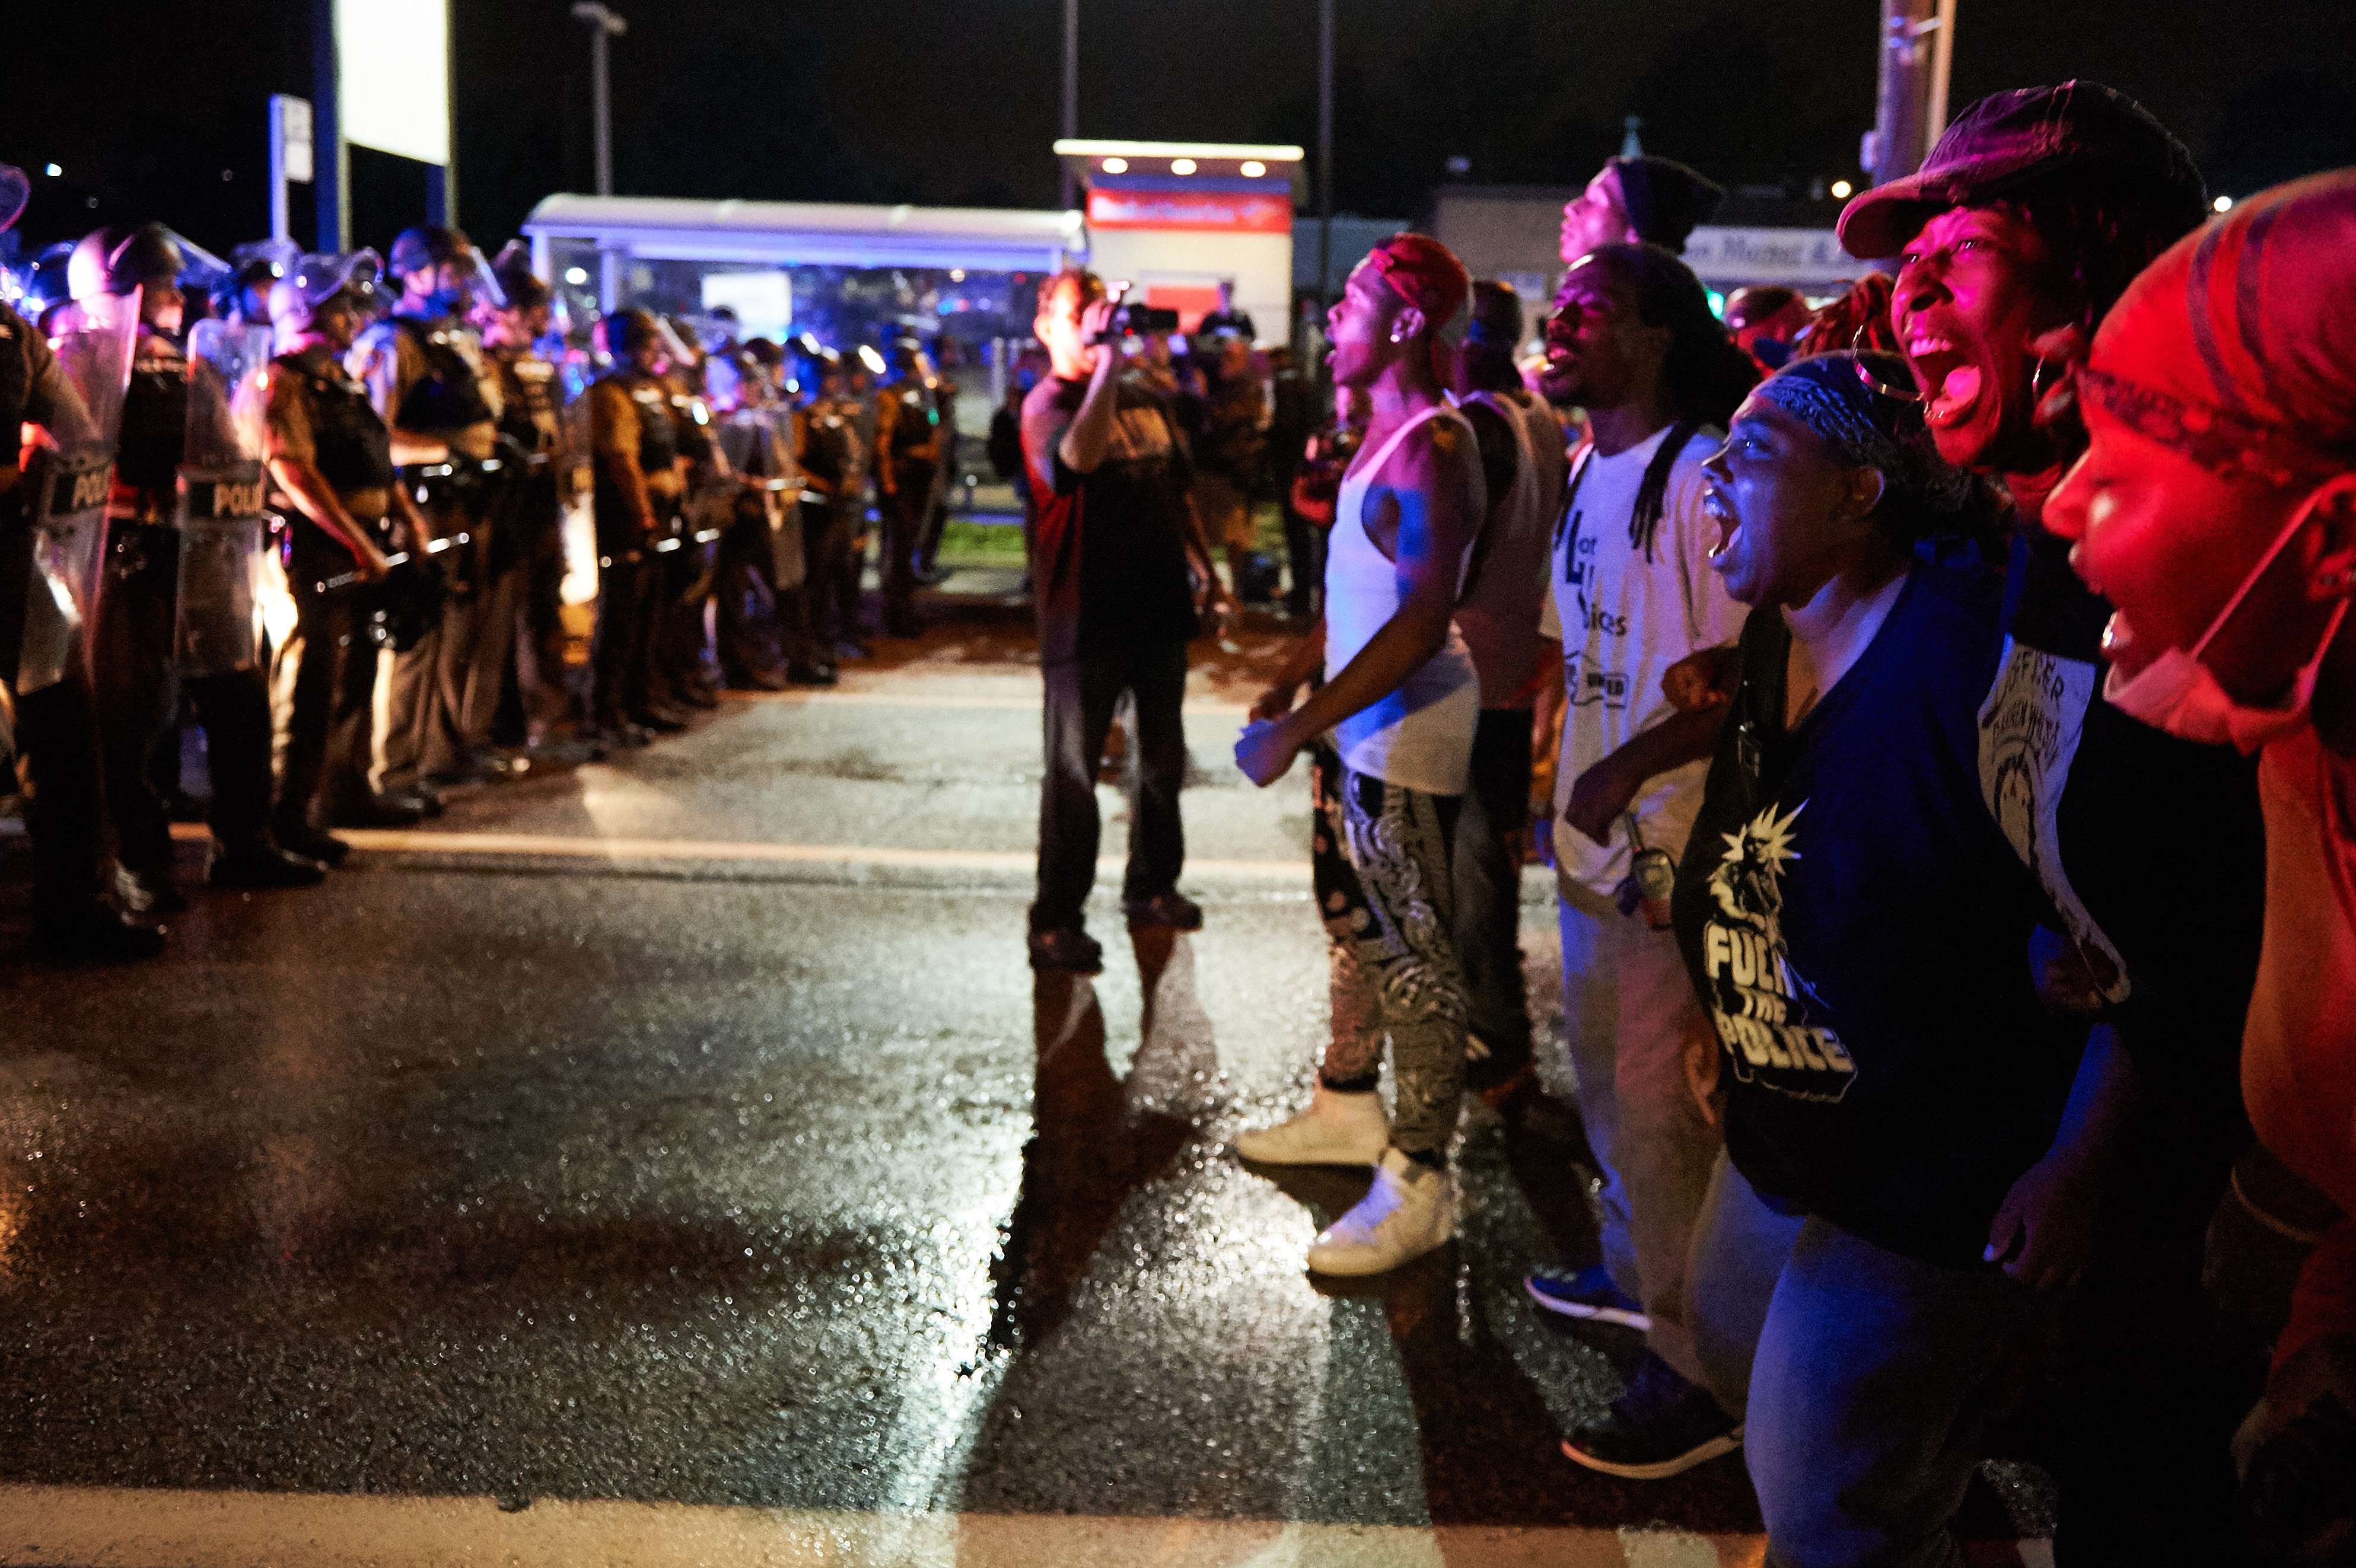 A group of demonstrators yell in front of police officers during a protest march on West Florissant Avenue in Ferguson, Mo. on August 9, 2015. (Michael B. Thomas—AFP/Getty Images)